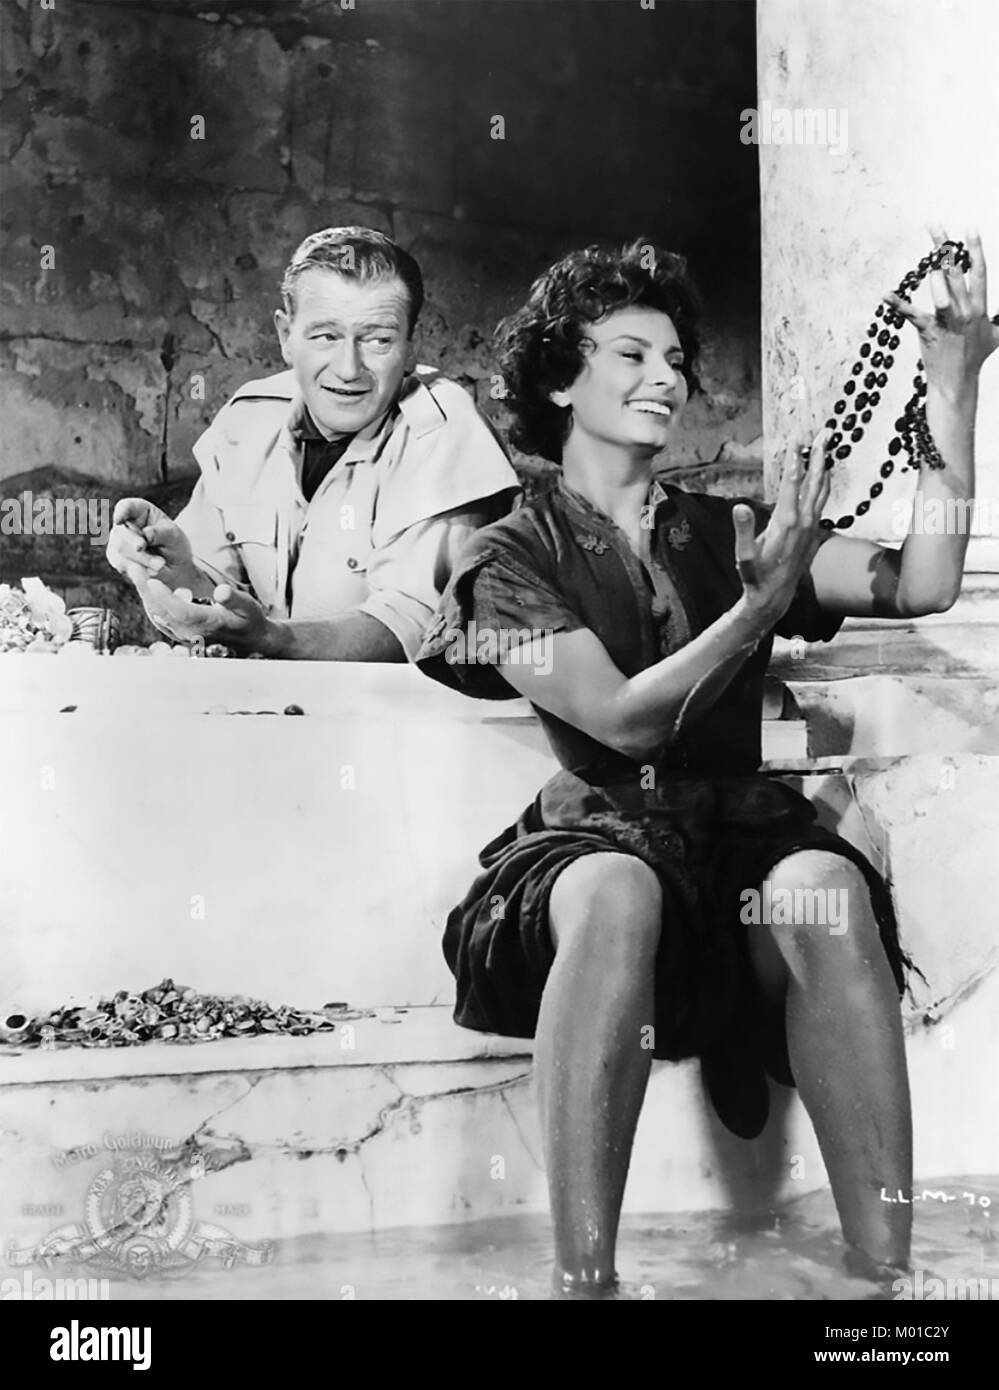 LEGEND OF THE LOST 1957 Batjac Productions film with Sophia Loren and John Wayne Stock Photo